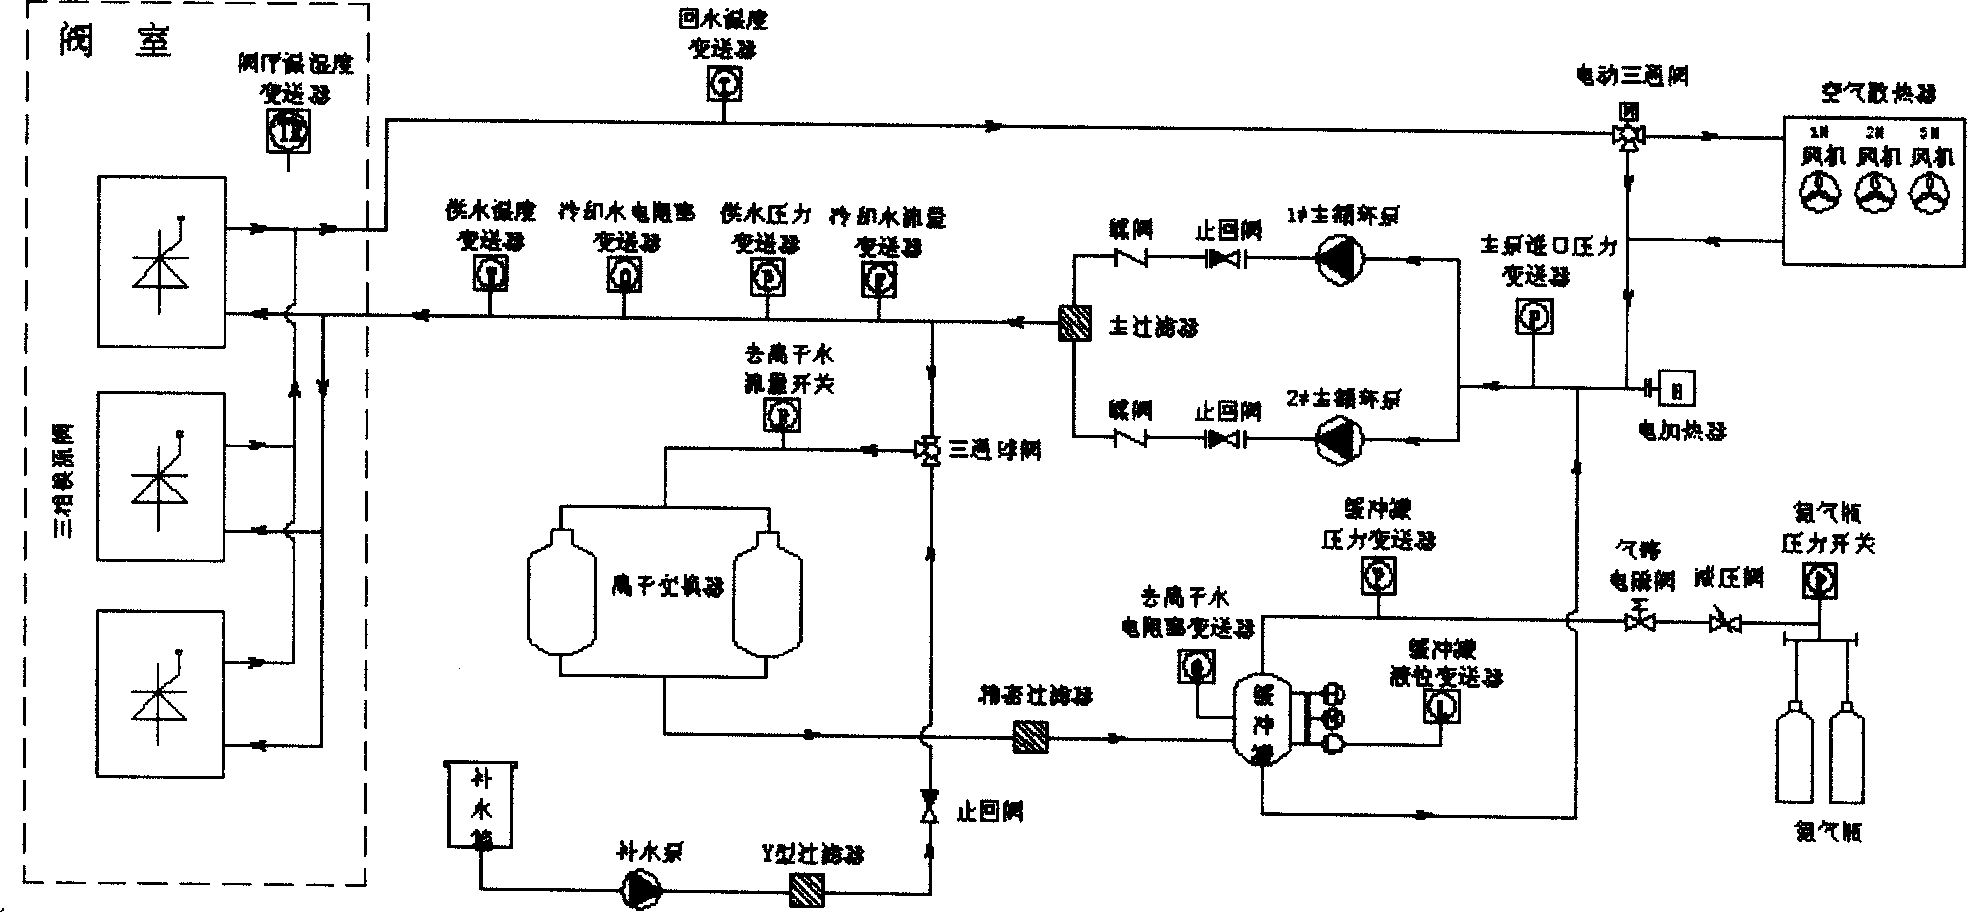 Control system of hermetic circulating type pure water cooling device for thyristor valve set